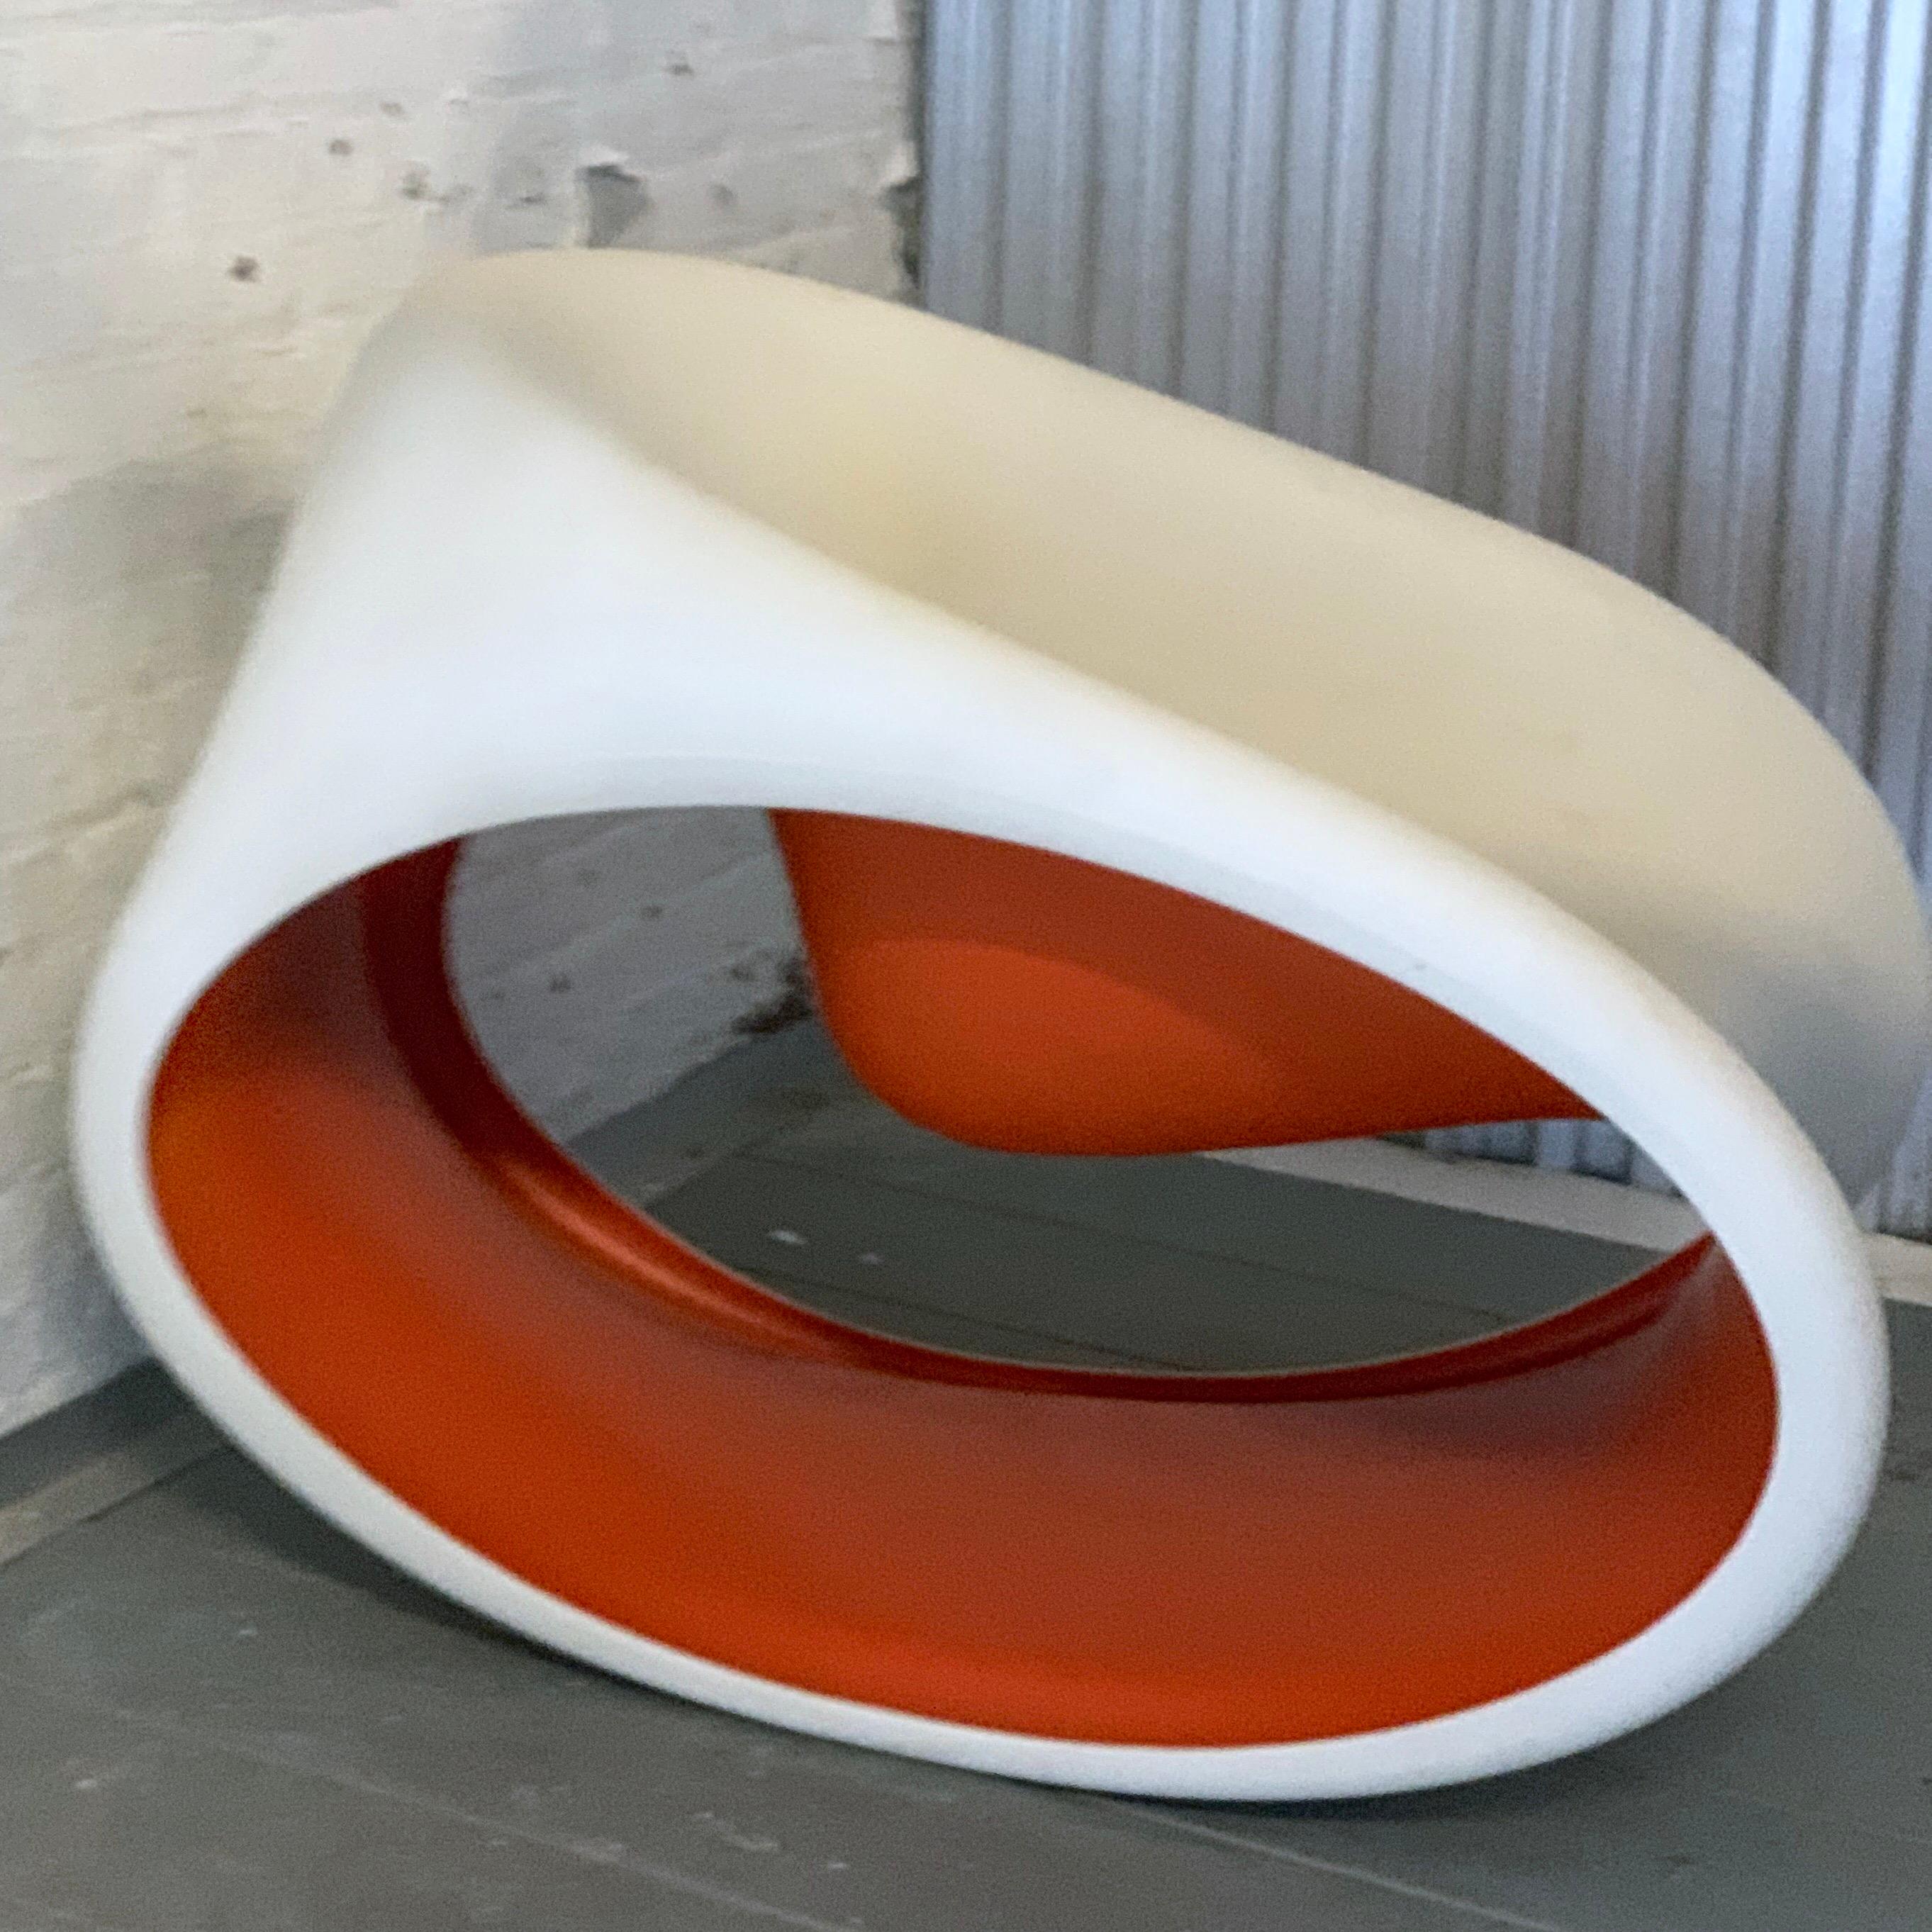 Space Age Sedia MT3 Rocking Chair by Ron Arad for Driade Italy, Red.

“mt”, the acronym defining this collection designed by Ron Arad, in English is pronounced “empty” that means “vacuum” and emptiness is really the key element of this project. The